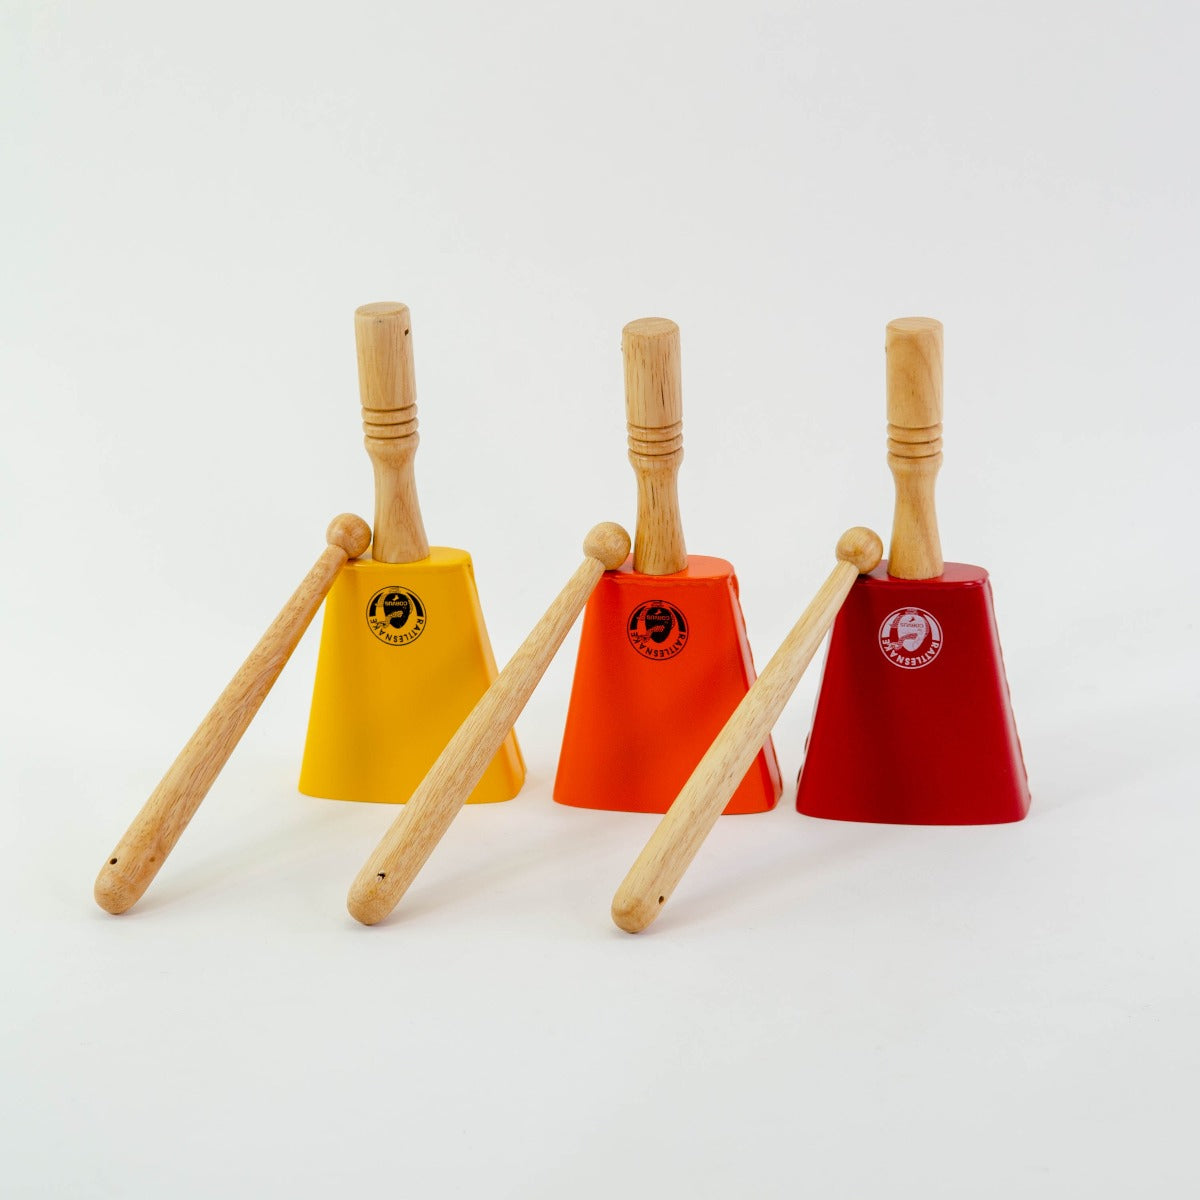 Shop Generic Cow Bell Noise Maker With Mallet Cowbell For Drum Set Online